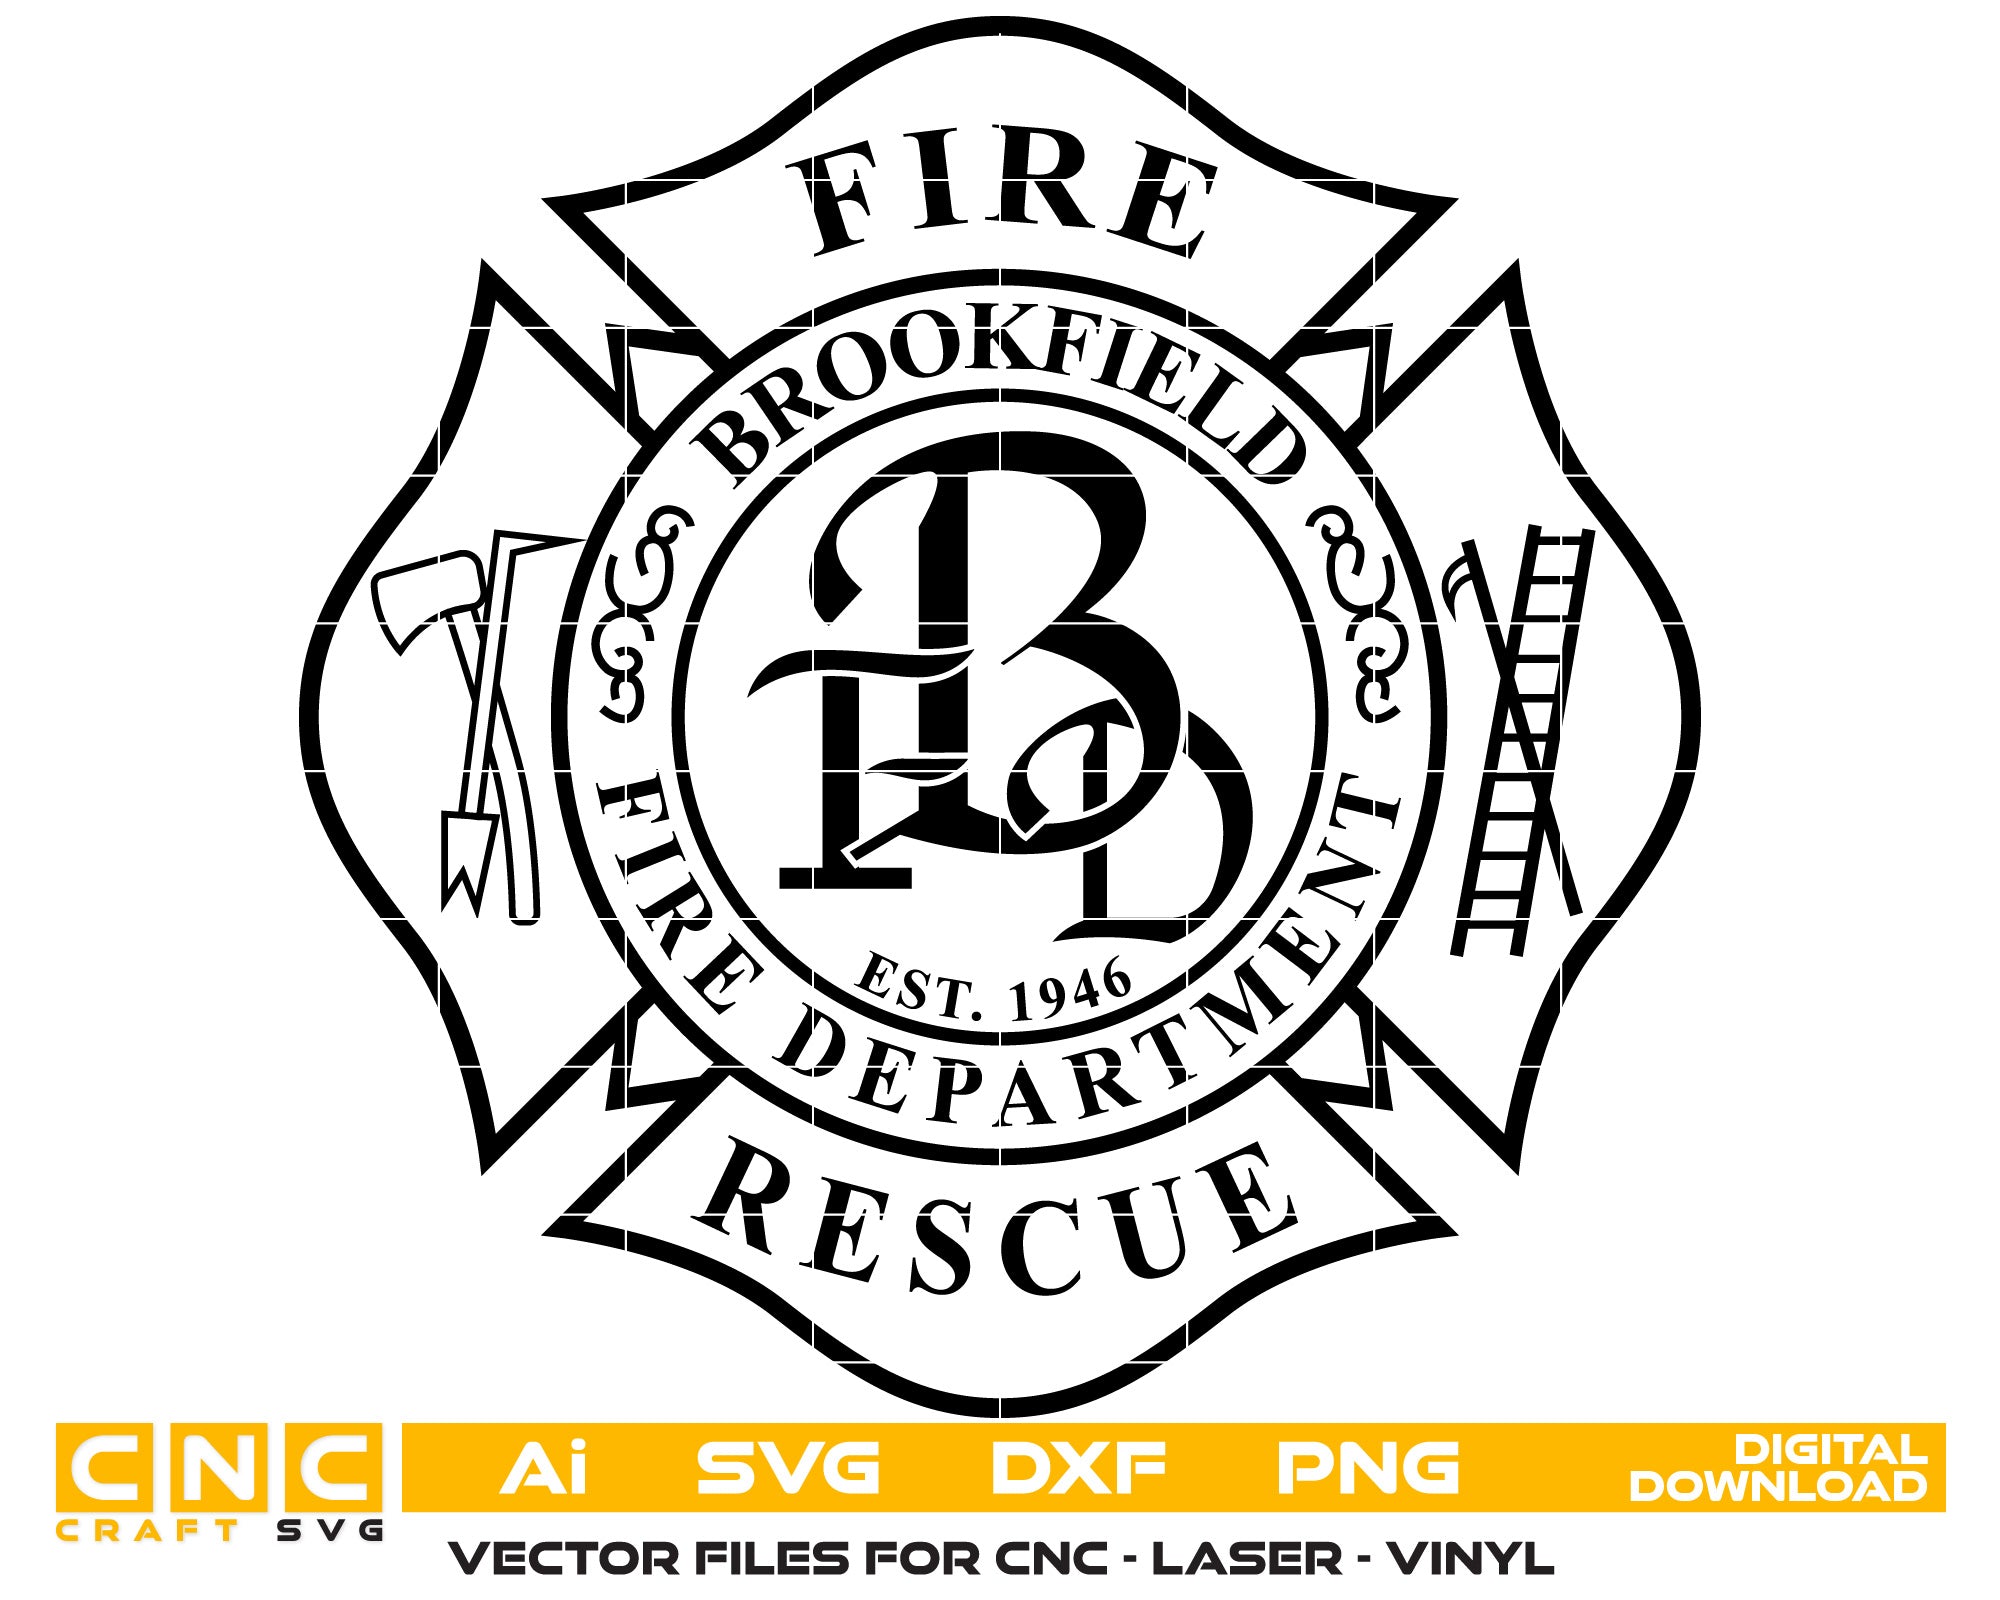 Brookfield Fire Rescue Department Vector Art, Ai,SVG, DXF, PNG, Digital Files